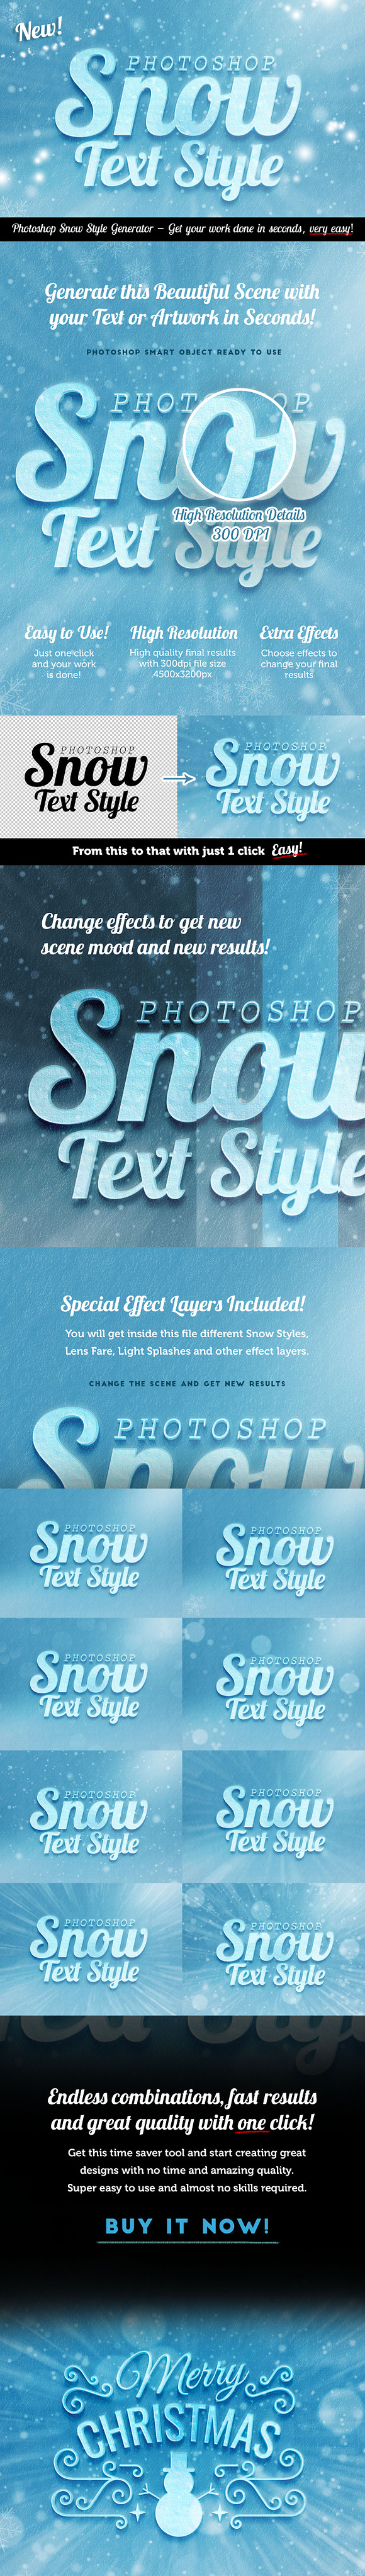 Snow Text Effect Psd for Photoshop in Photoshop Layer Styles - product preview 3